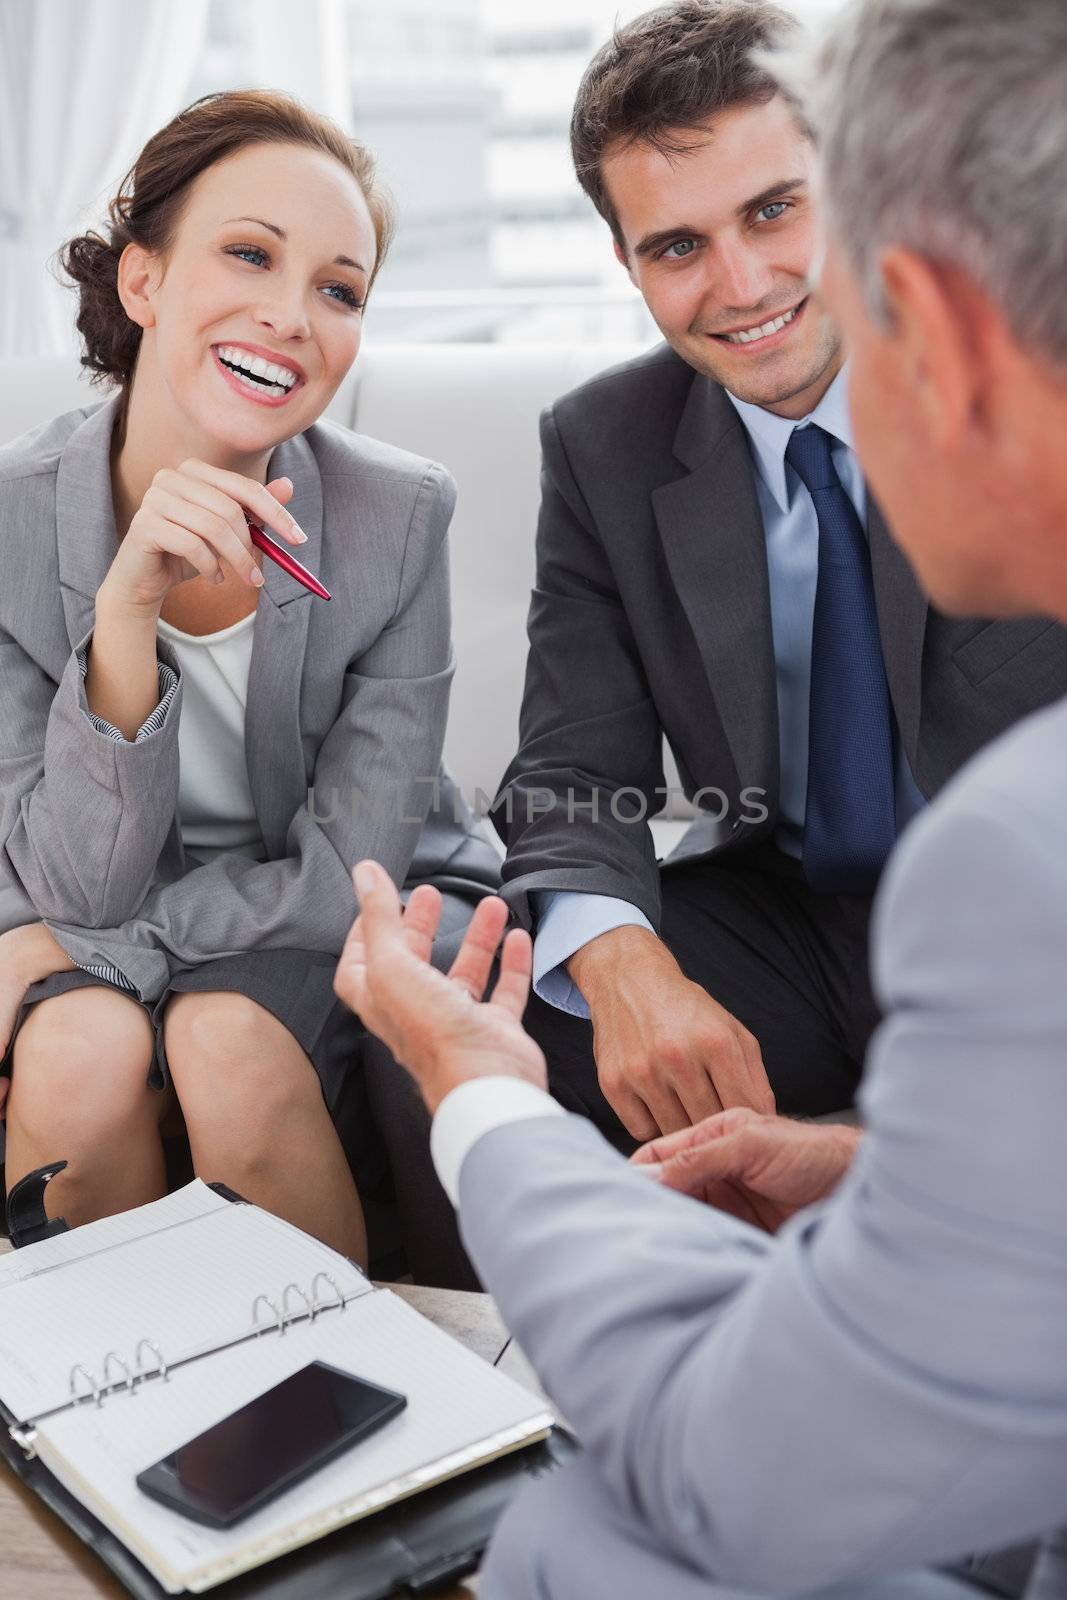 Business people arranging an appointment  by Wavebreakmedia